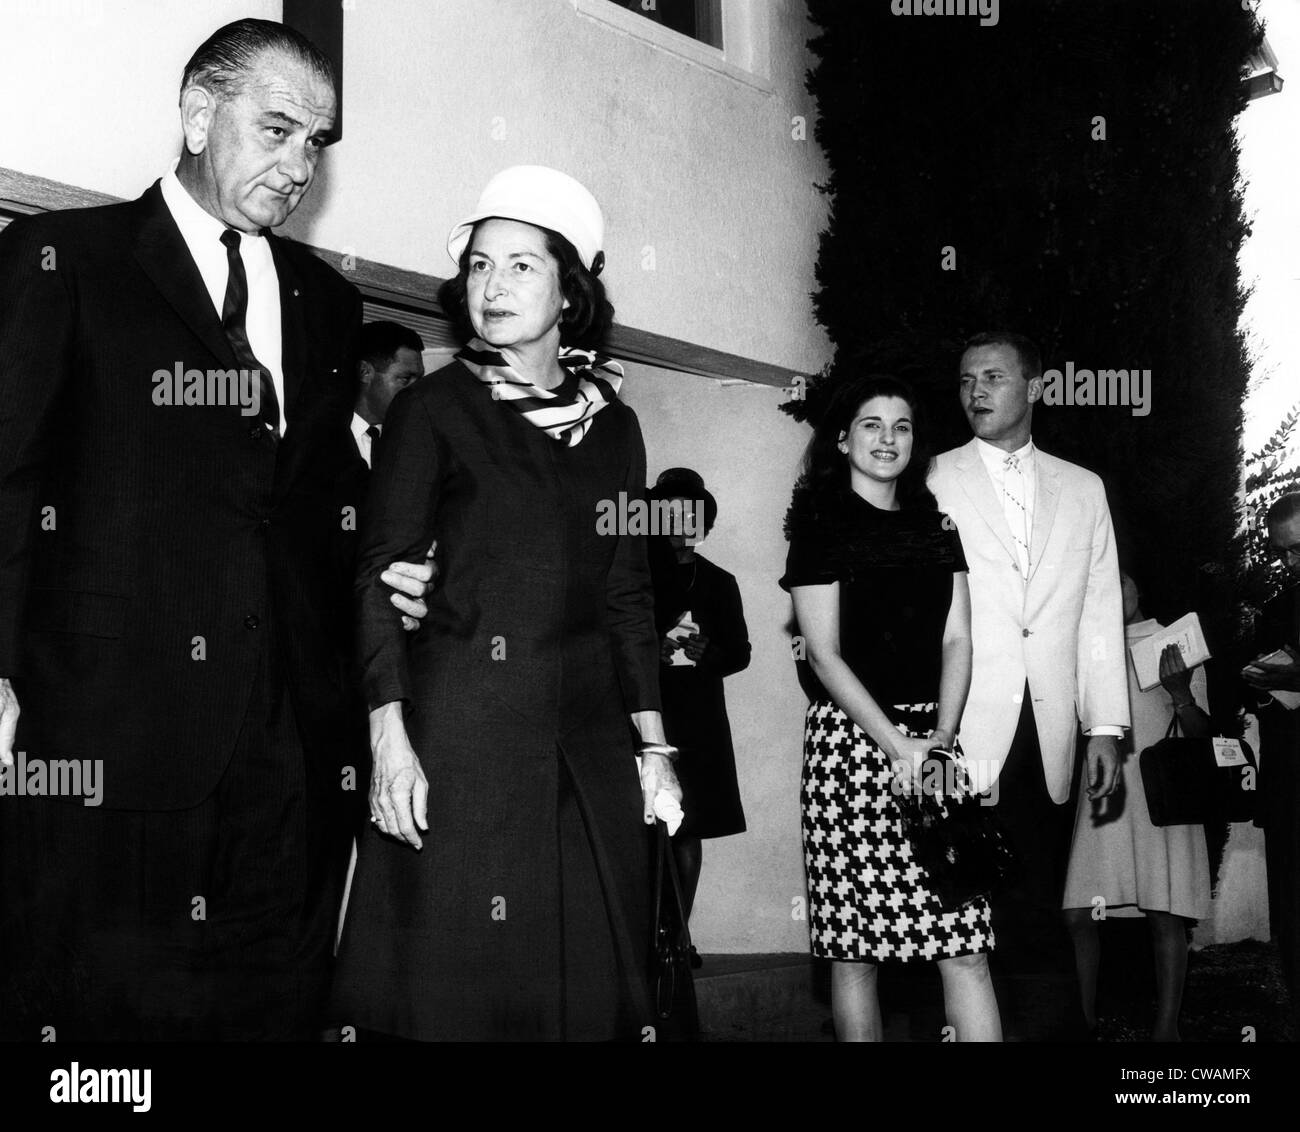 President and Mrs Johnson Johnson, leave church along with her daughter Luci and her husband Pat Nugent. October 9, 1966. Stock Photo